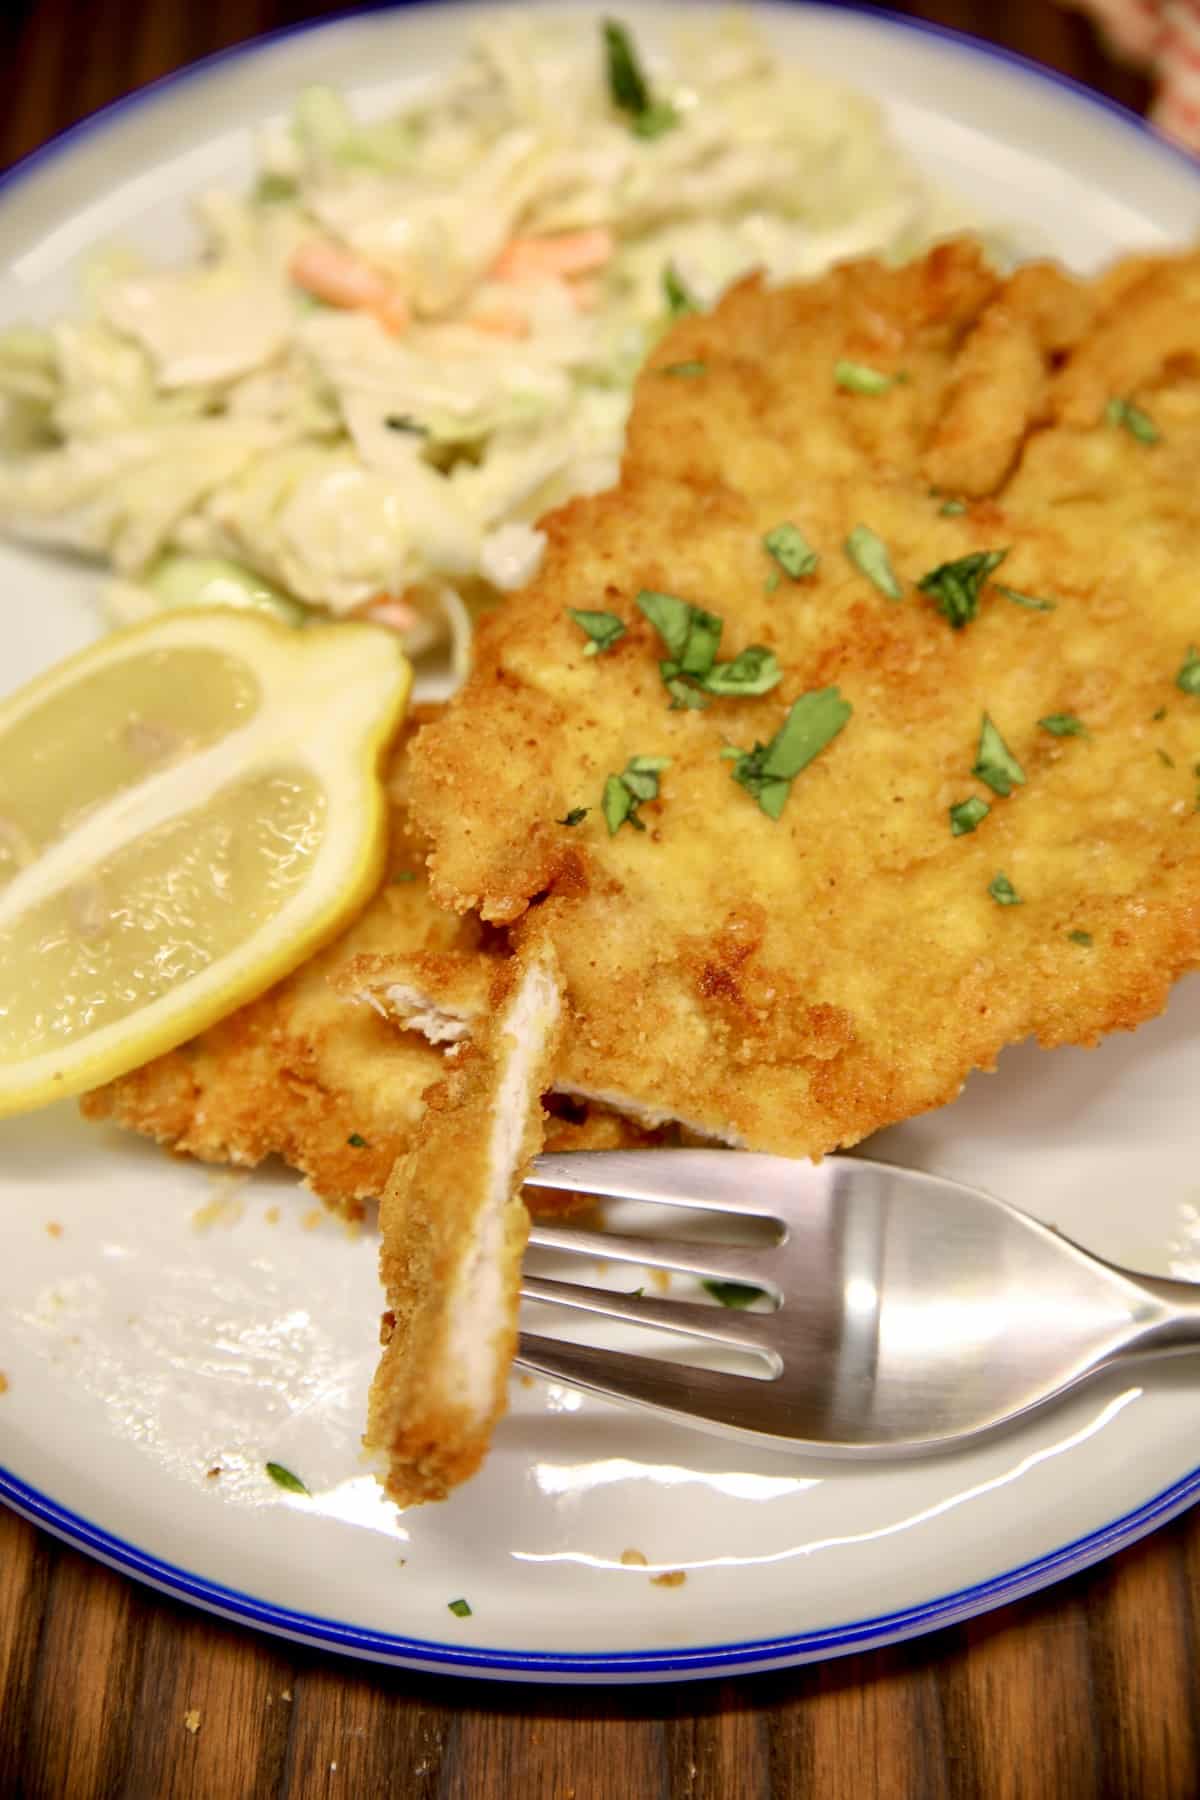 Pork schnitzel on a plate with lemon and coleslaw. Bite on a fork.